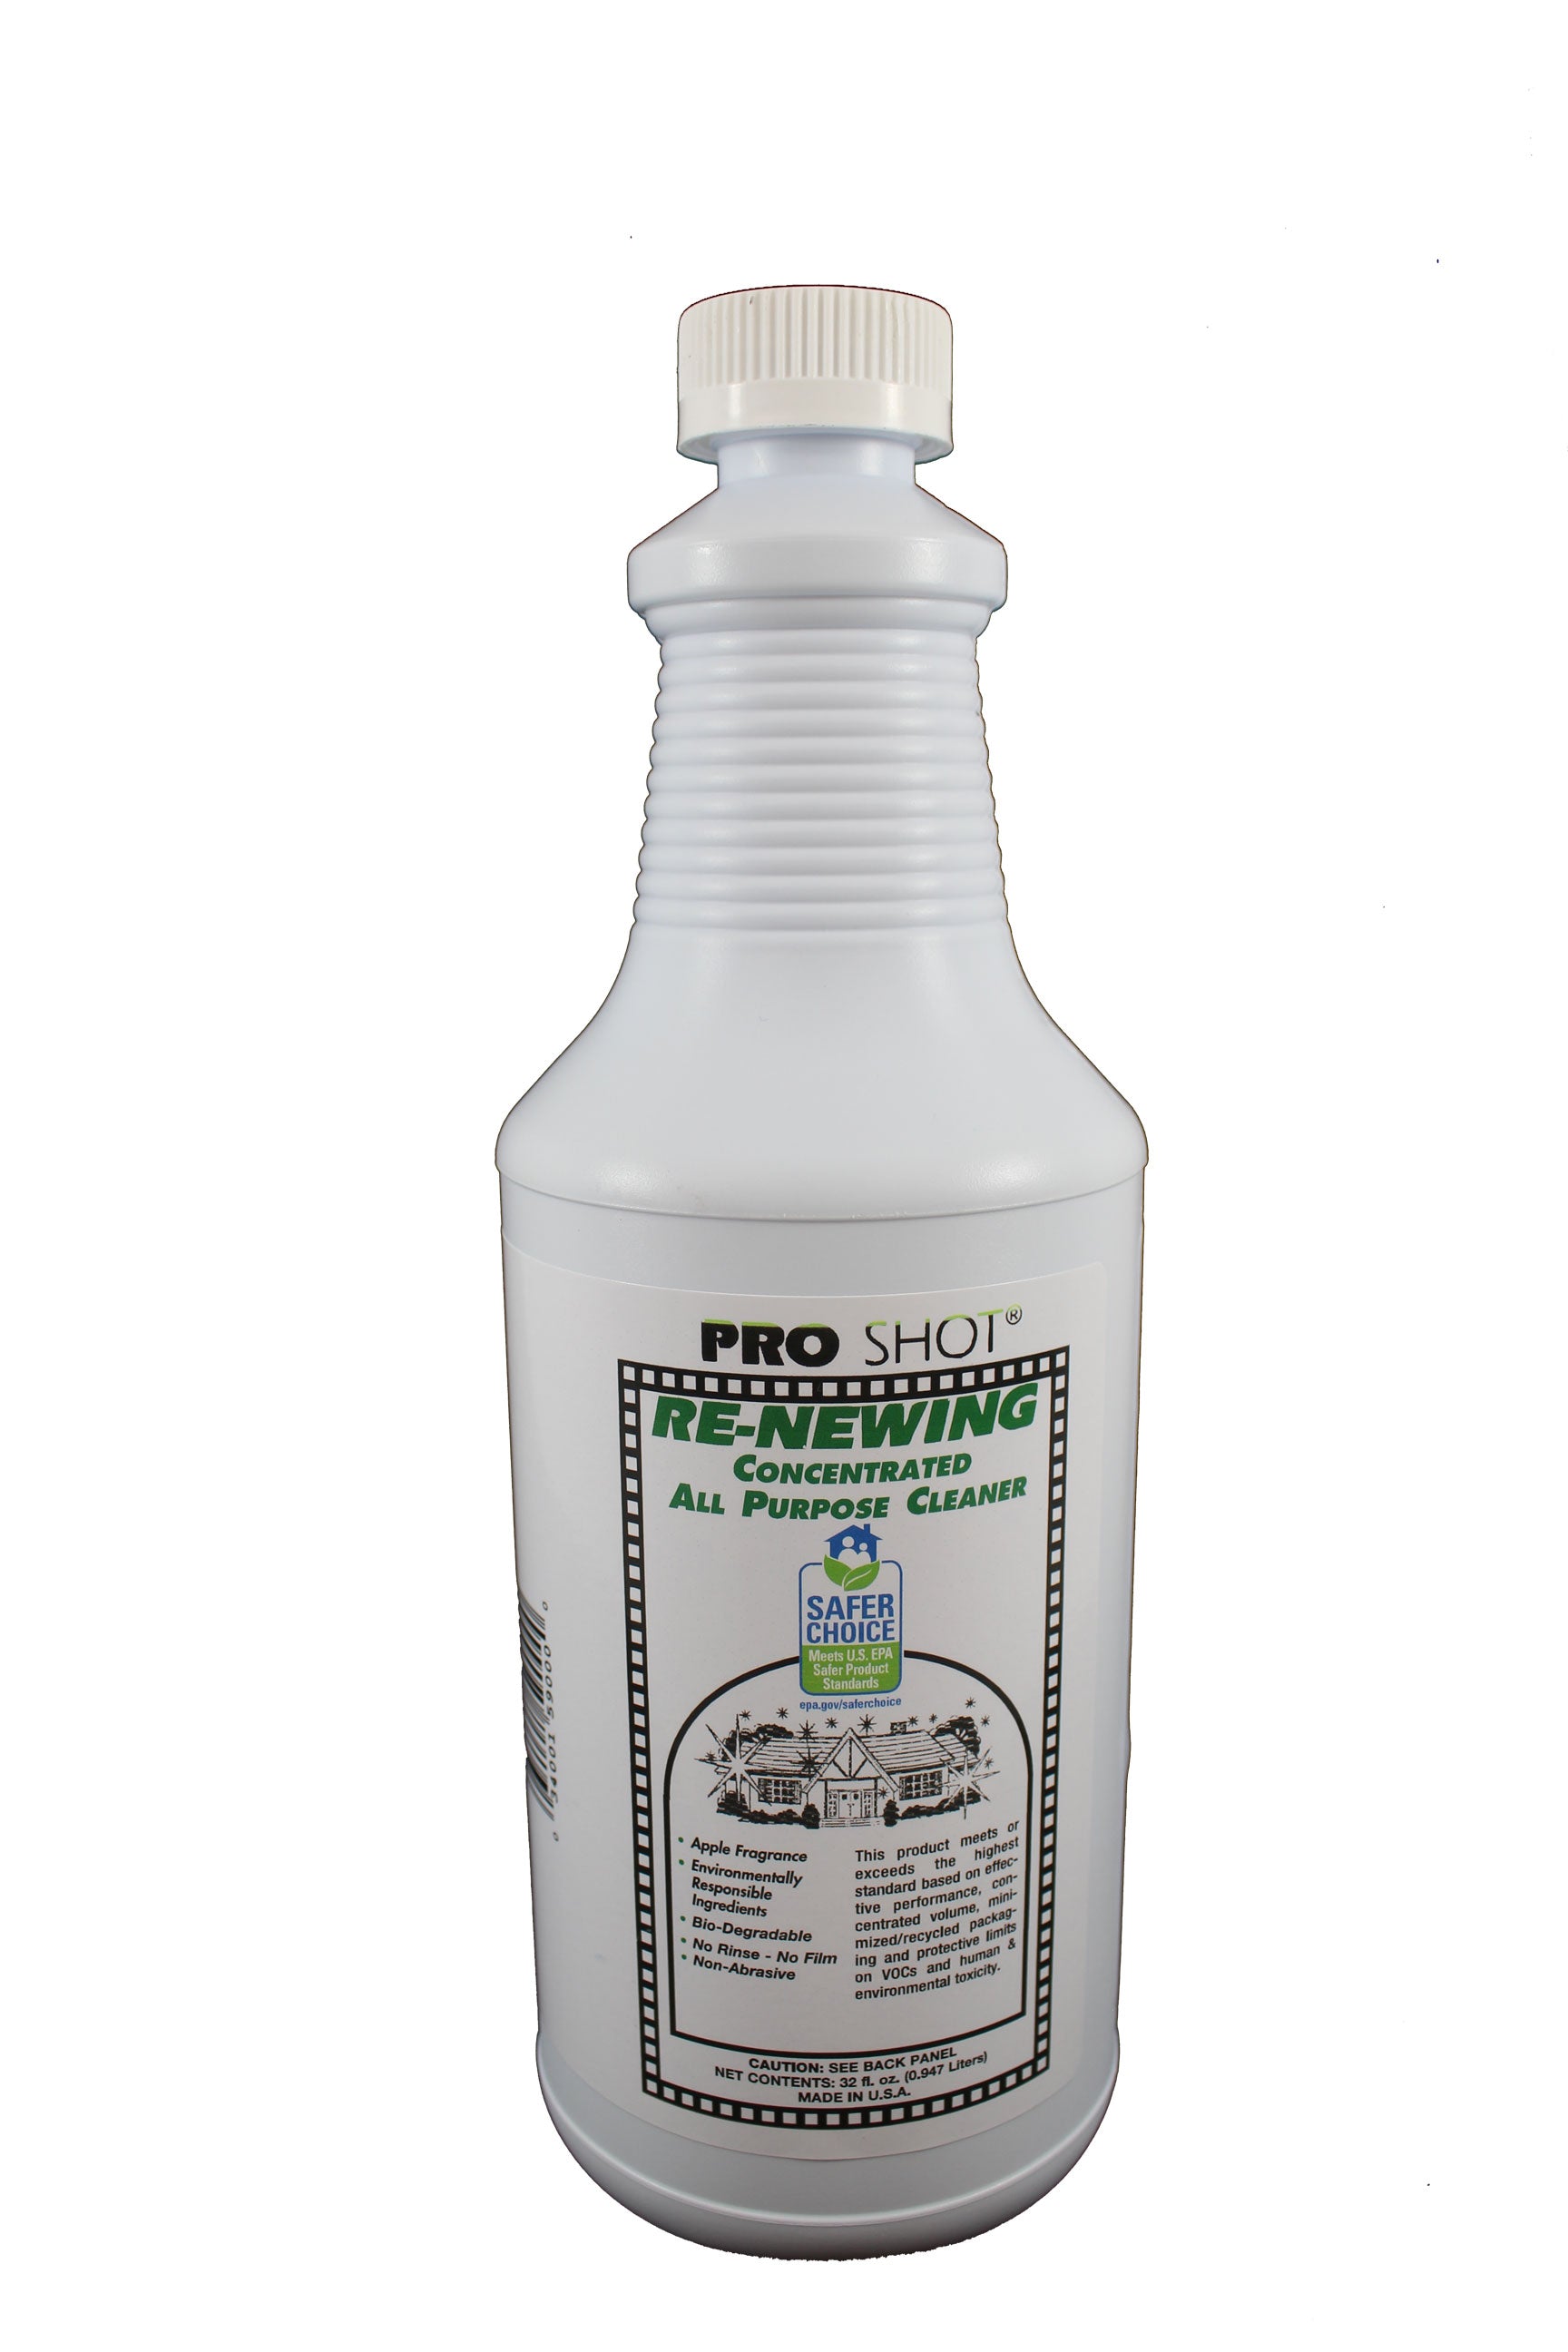 PRO SHOT® Re-Newing Concentrated All Purpose Cleaner 32 oz image